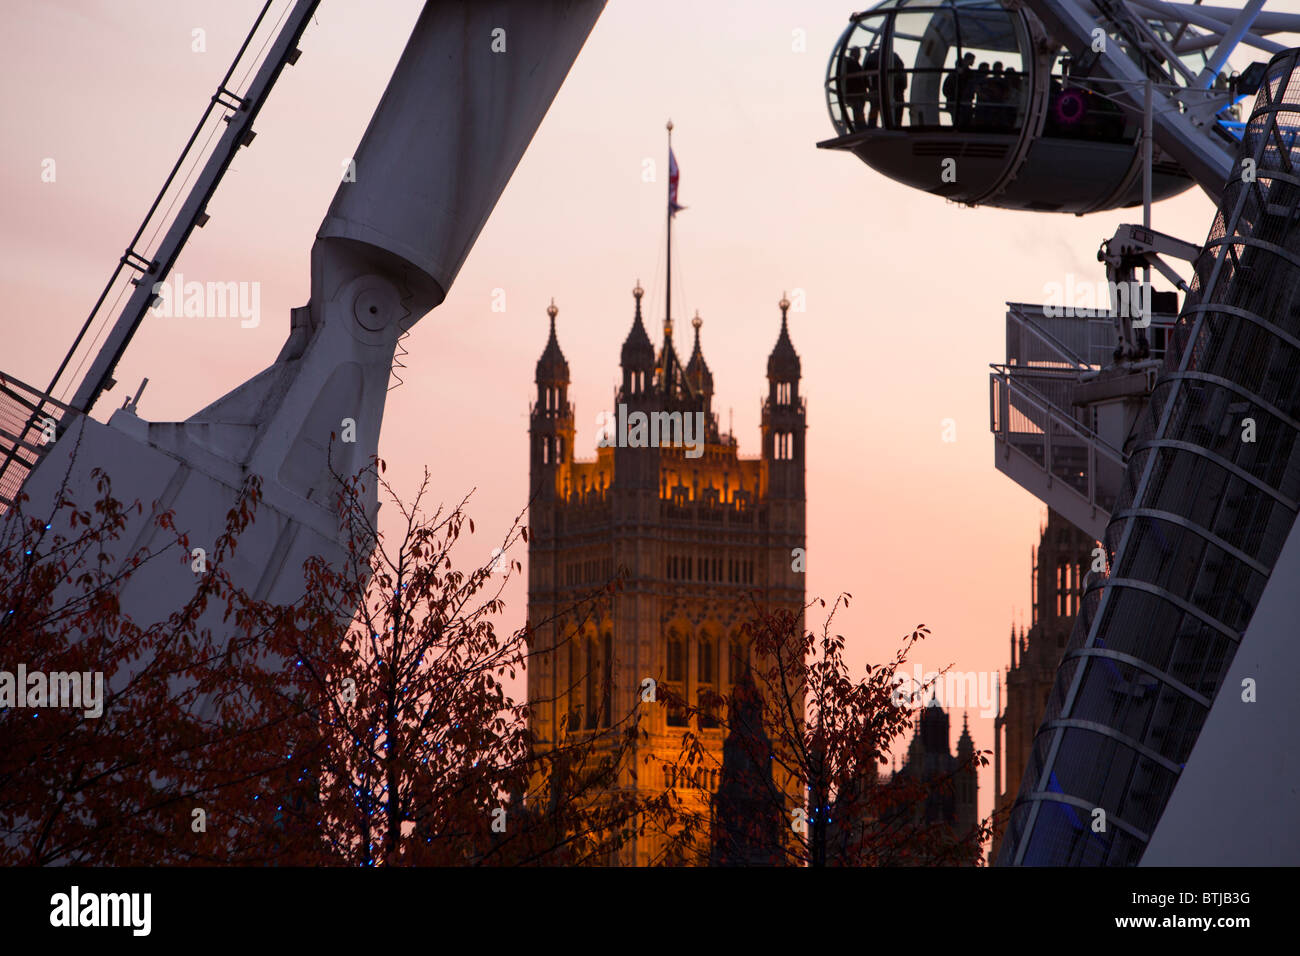 The London Eye on the Thames embankment in London at dusk. Stock Photo